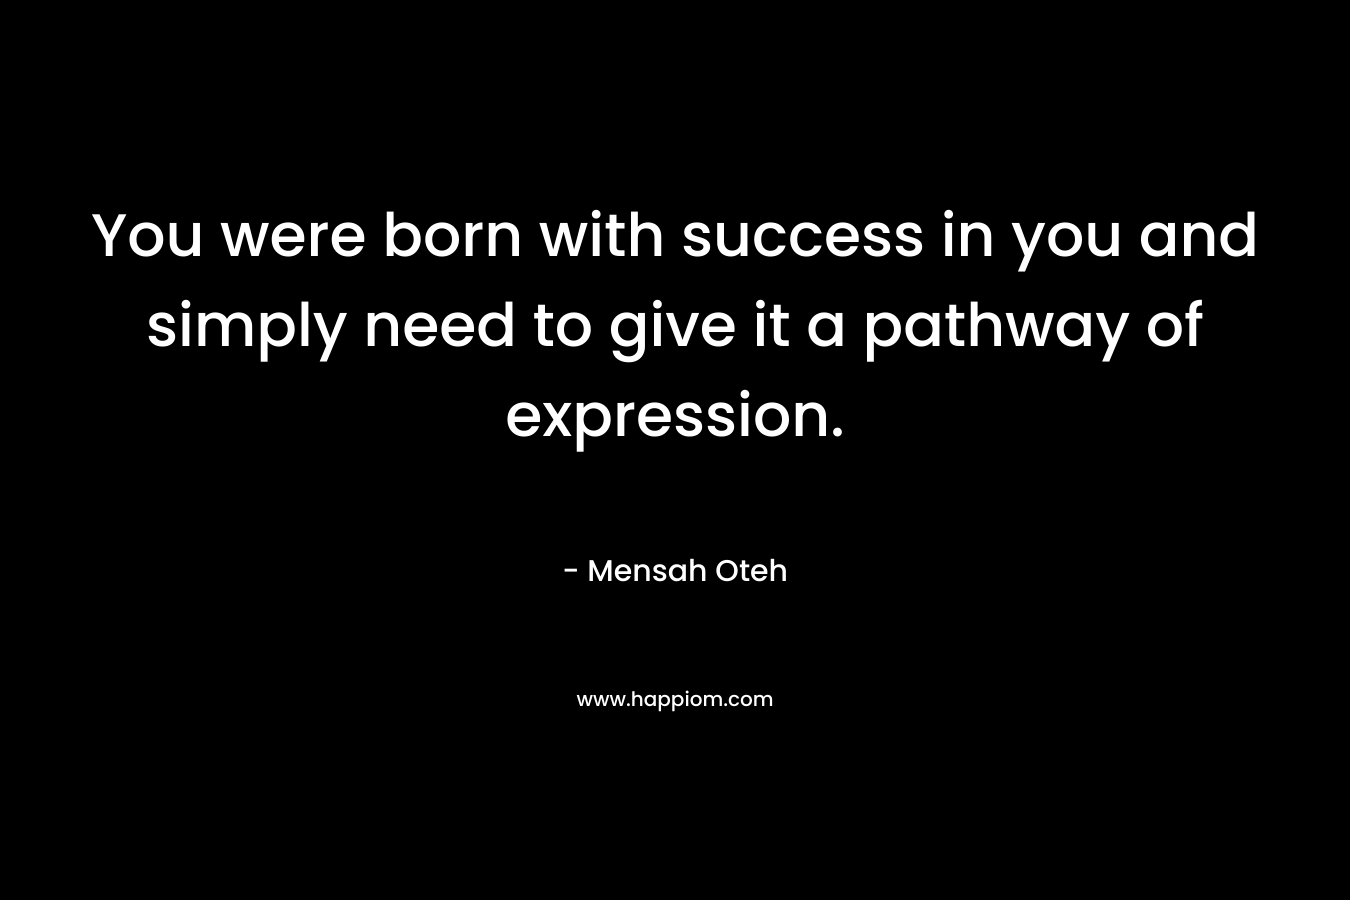 You were born with success in you and simply need to give it a pathway of expression.